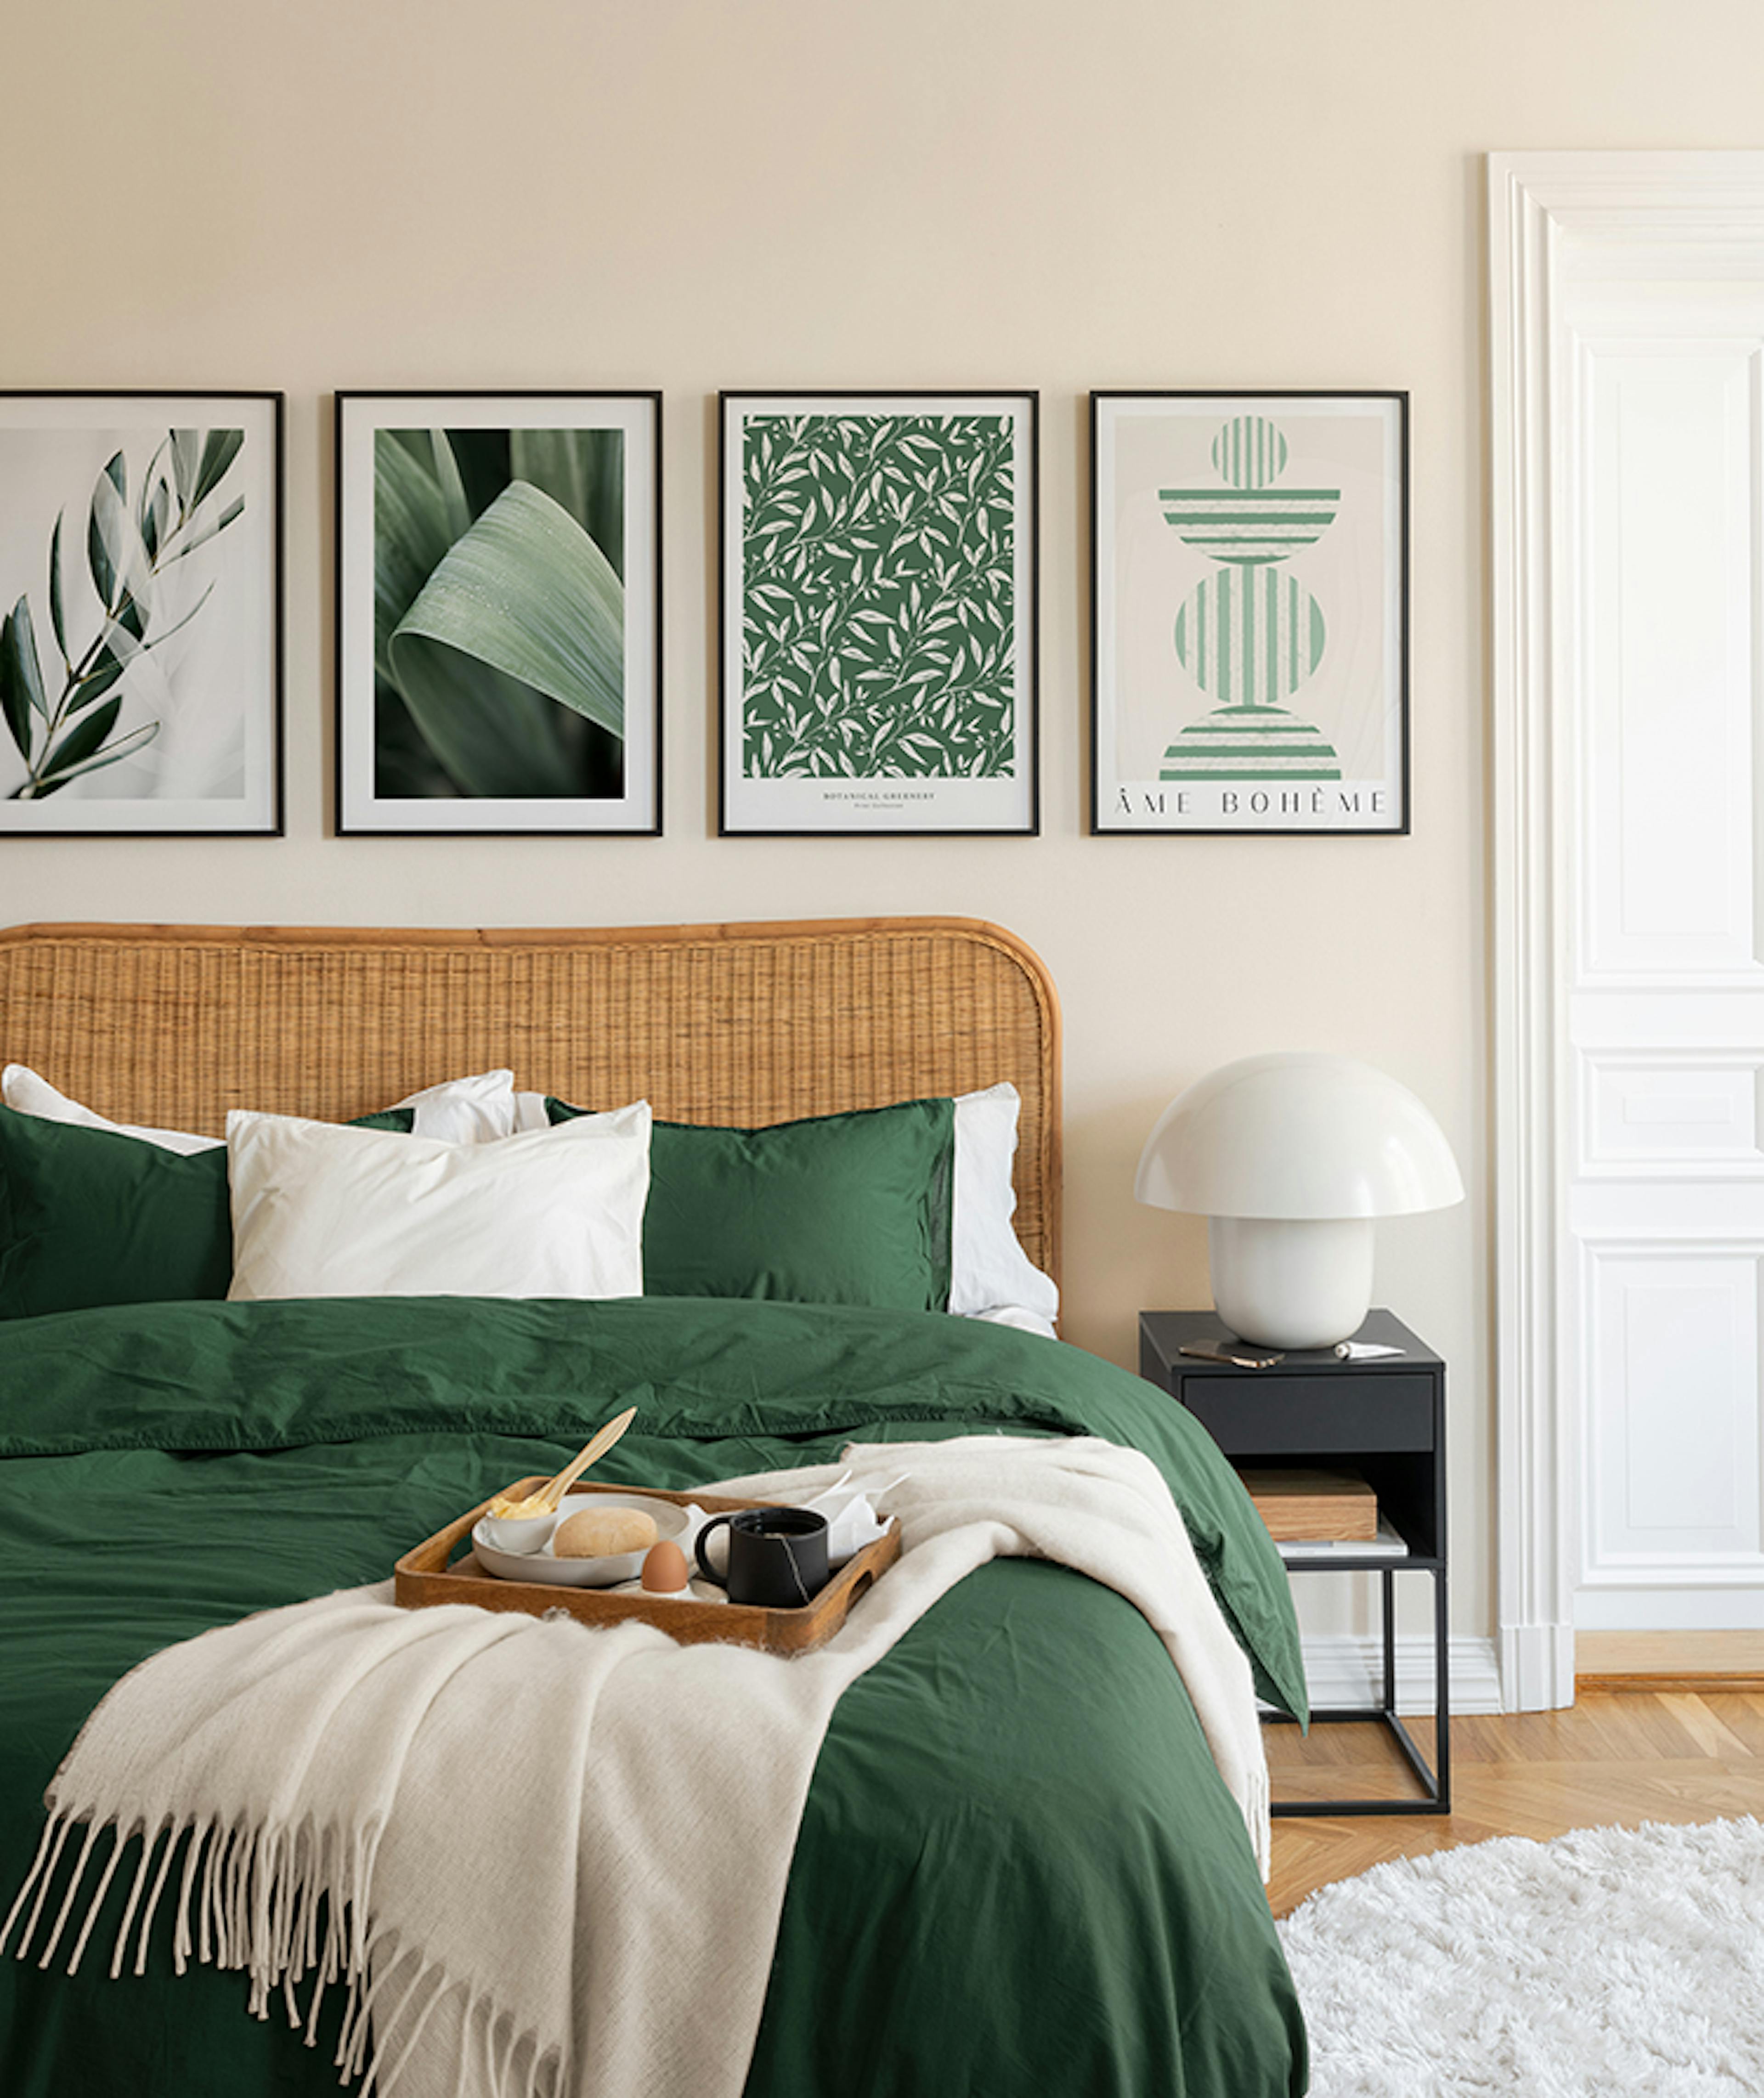 Abstract wall art and photographs with a green theme with black wood frames for the bedroom